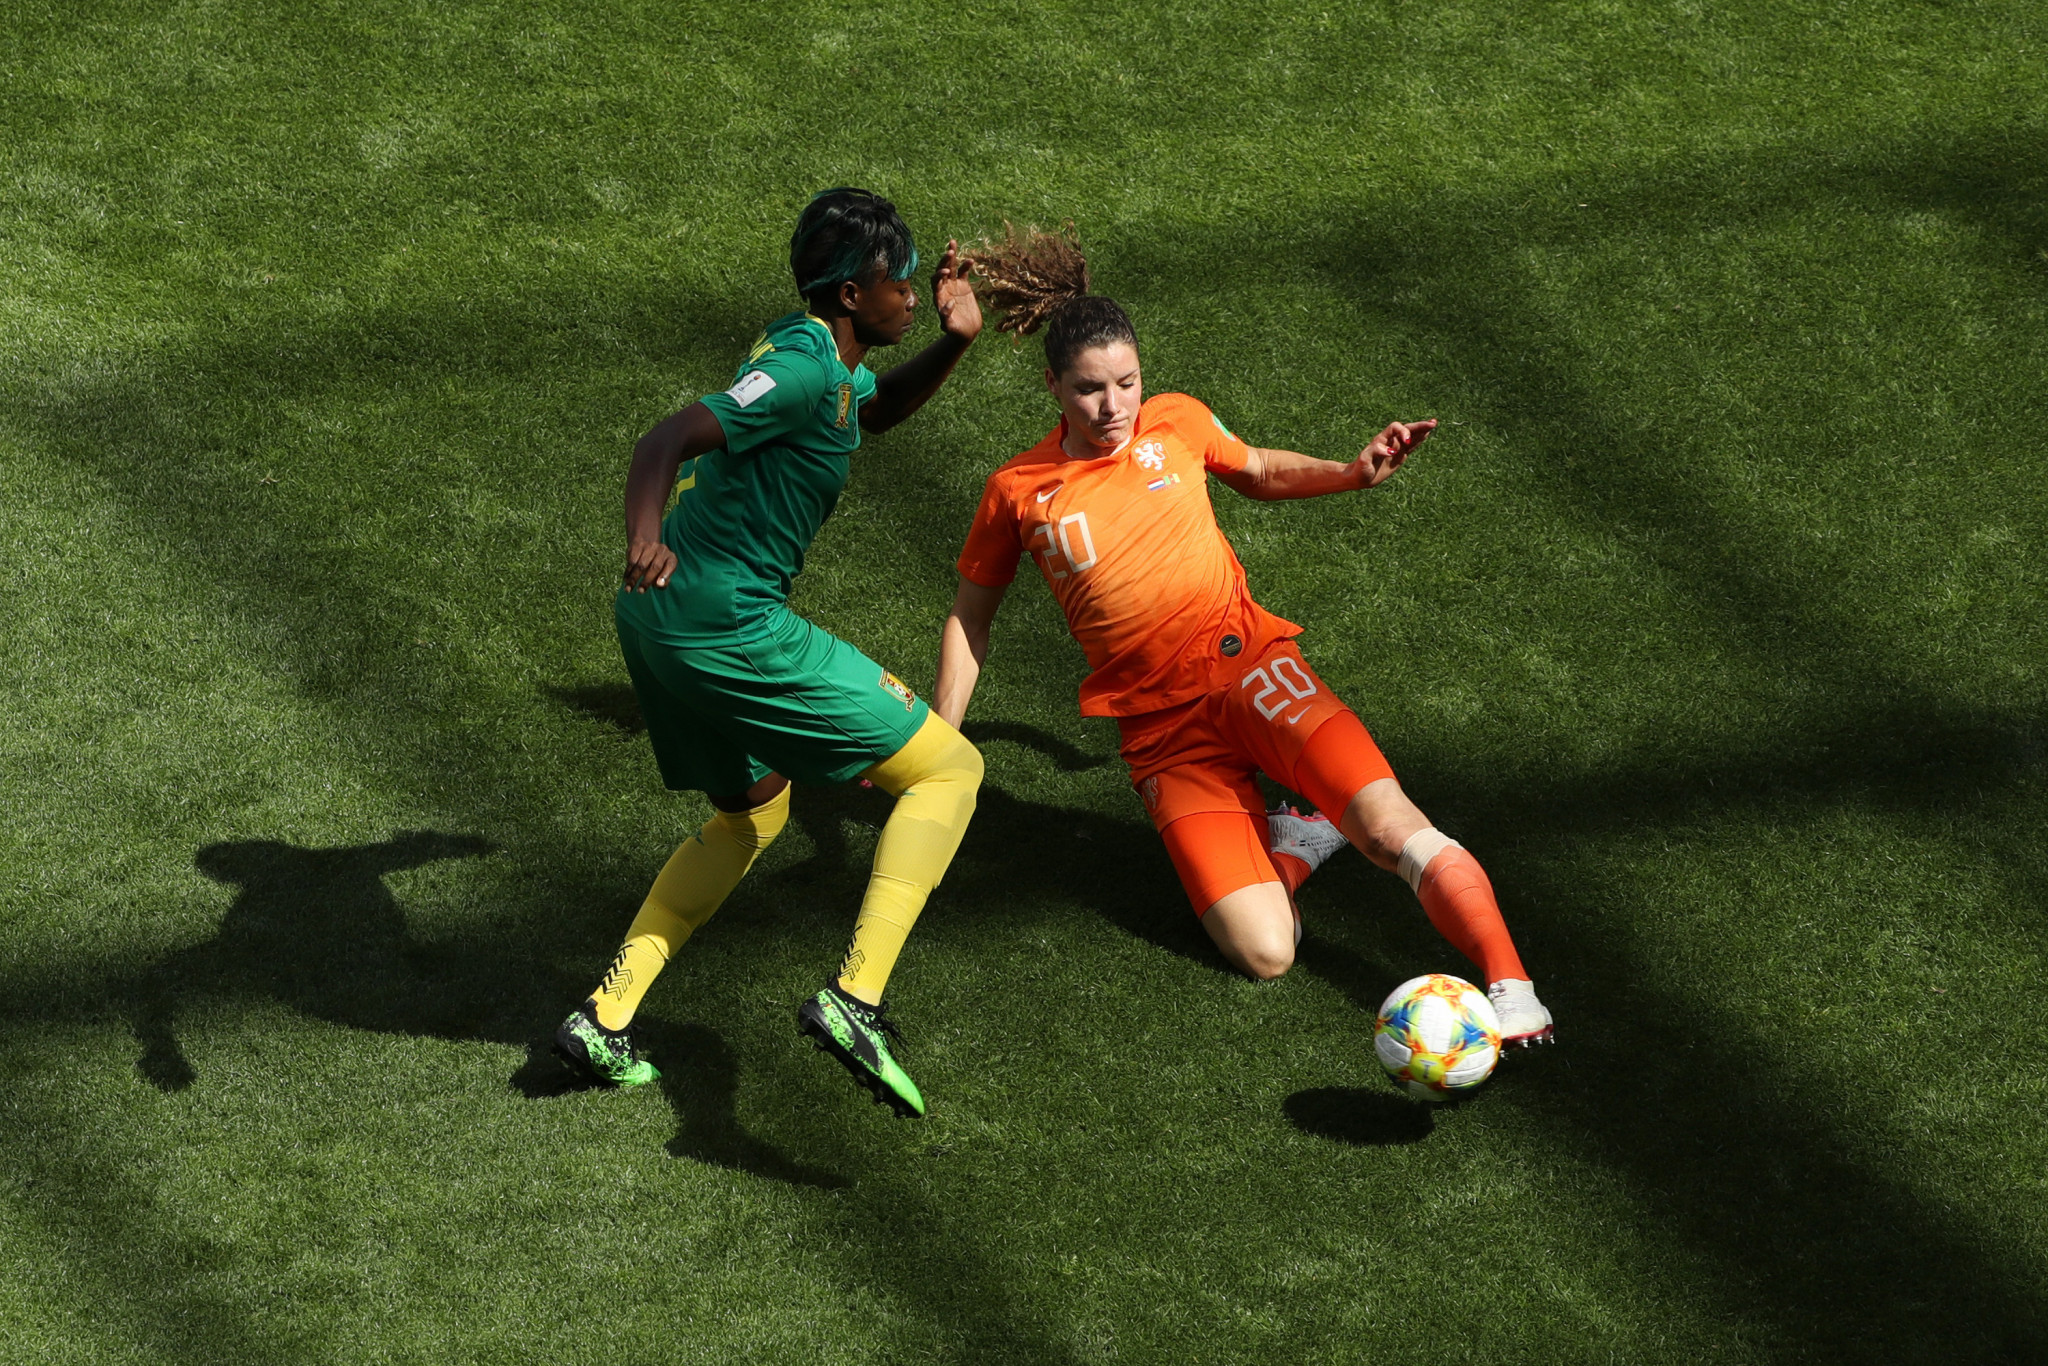 European champions the Netherlands reach last 16 of 2019 FIFA Women's World Cup